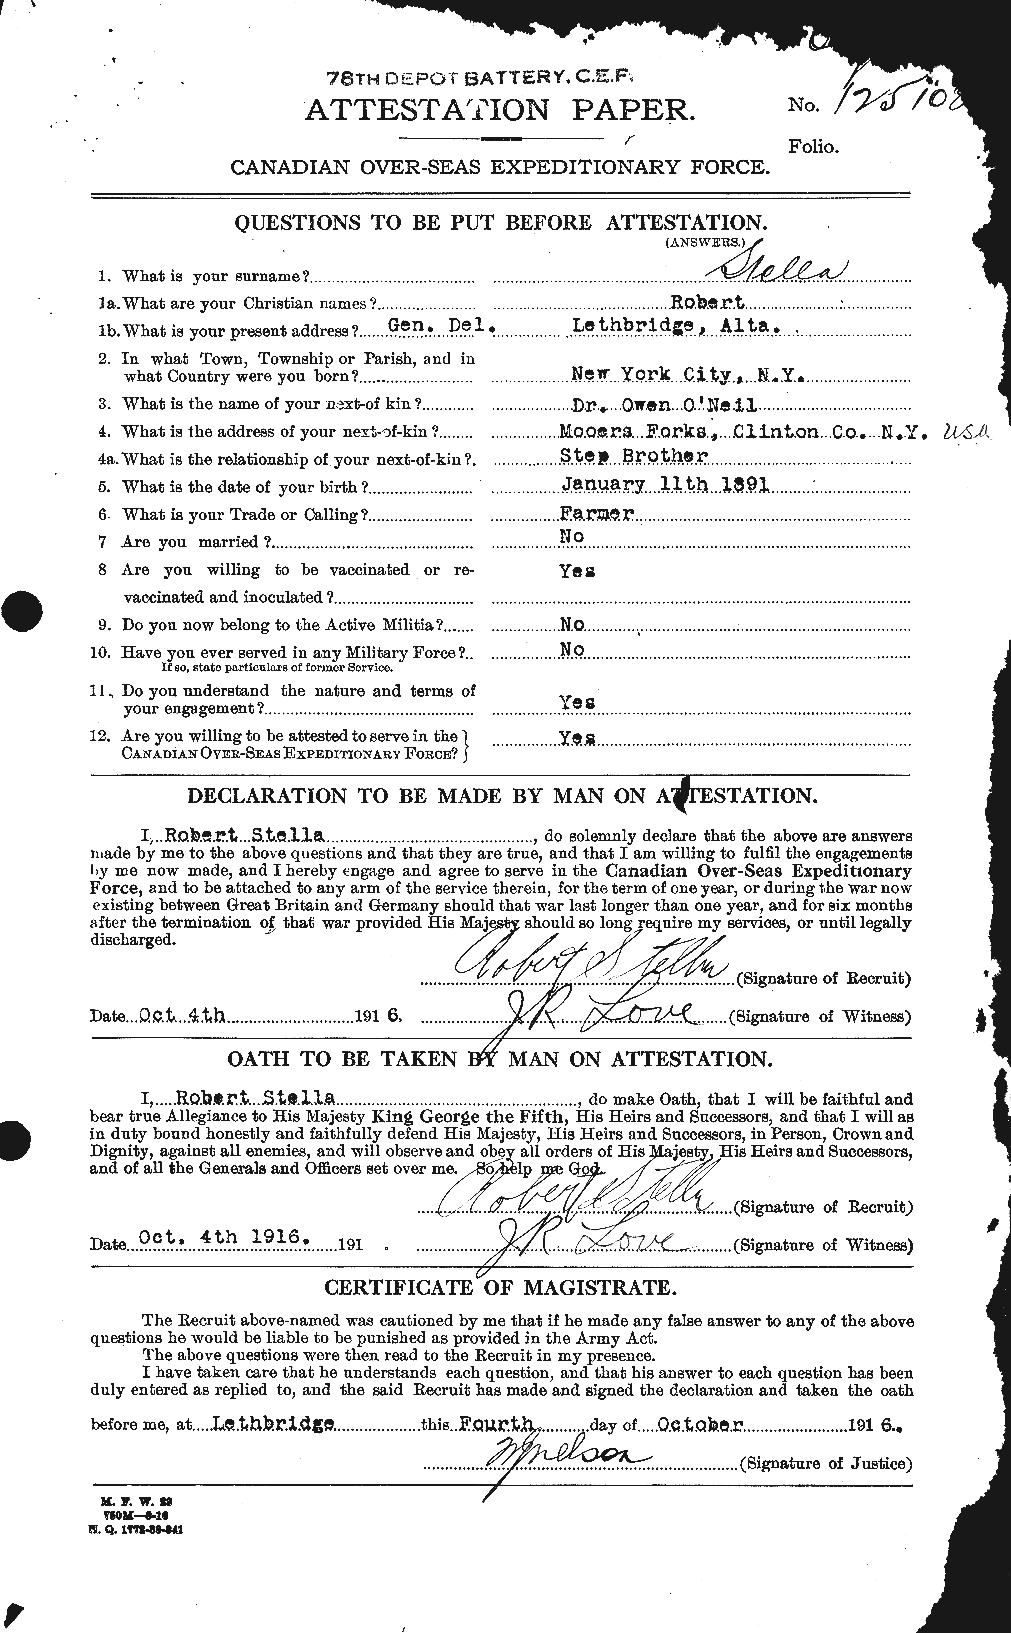 Personnel Records of the First World War - CEF 118457a